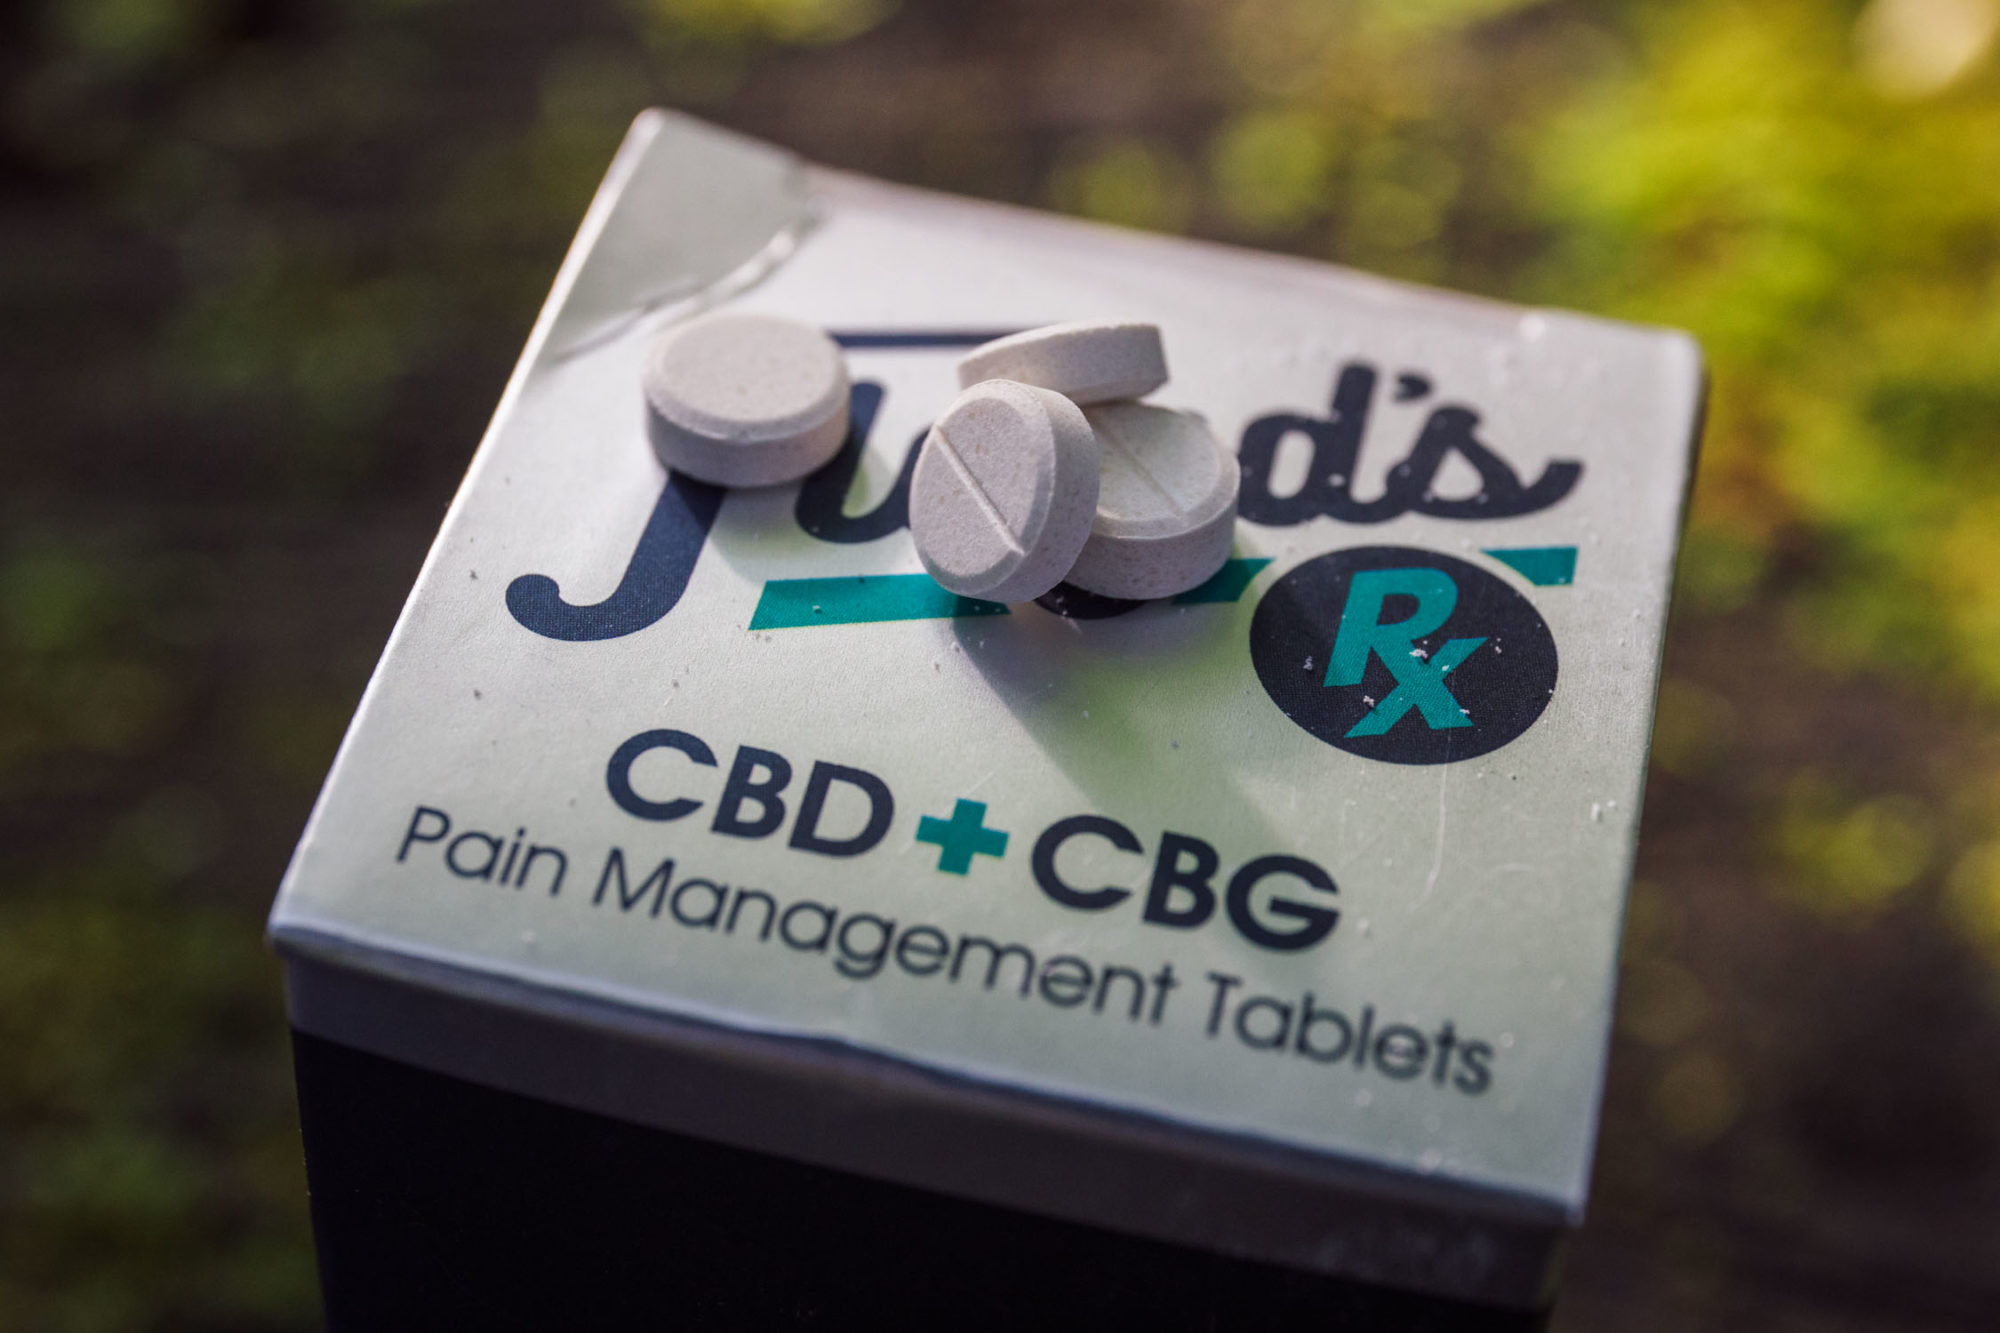 Does CBD work? CBD for cycling